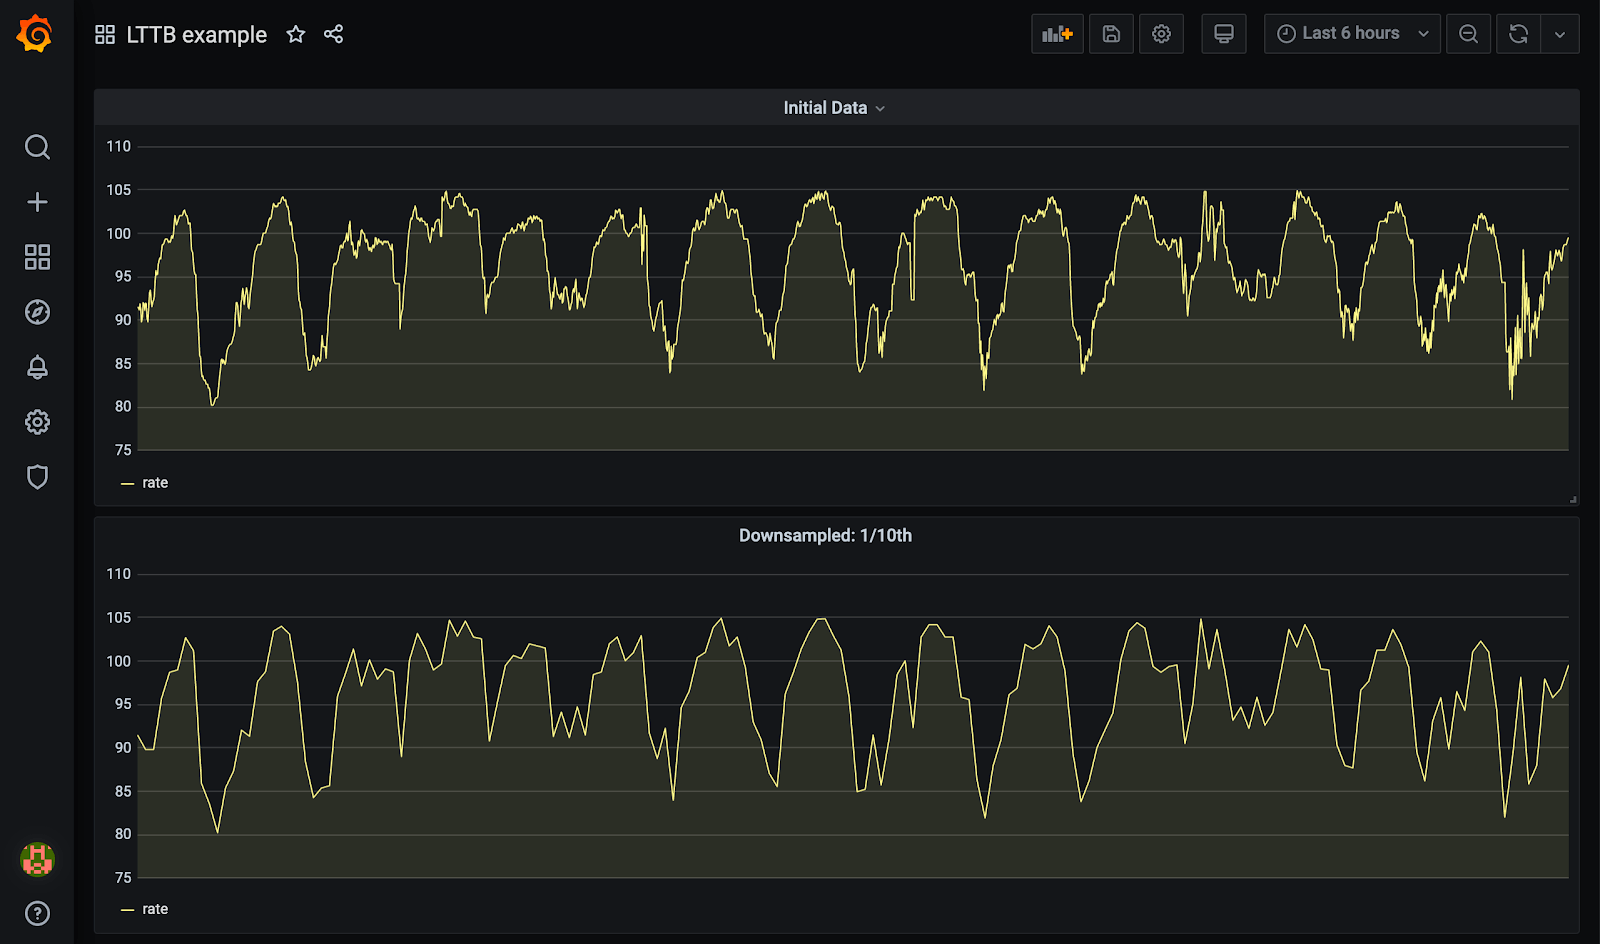 Grafana dashboard UI showing initial and downsampled (1/10th) datasets.